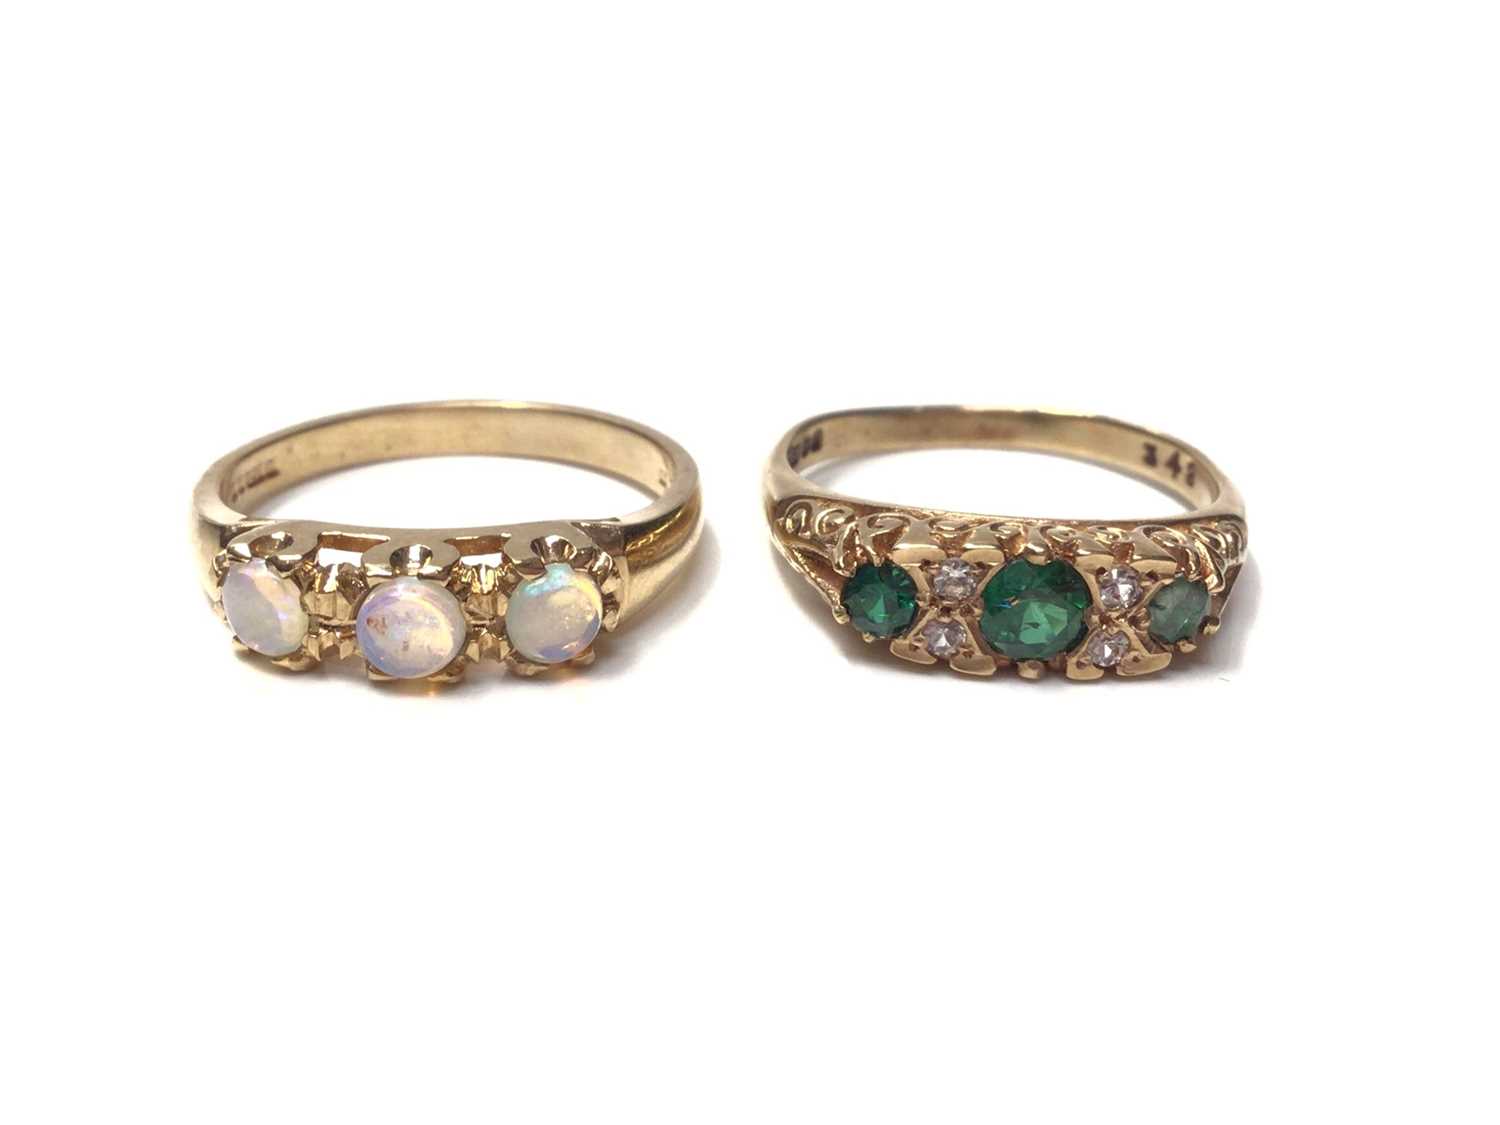 Lot 24 - 9ct gold three stone opal ring and Victorian style 9ct gold gem set ring